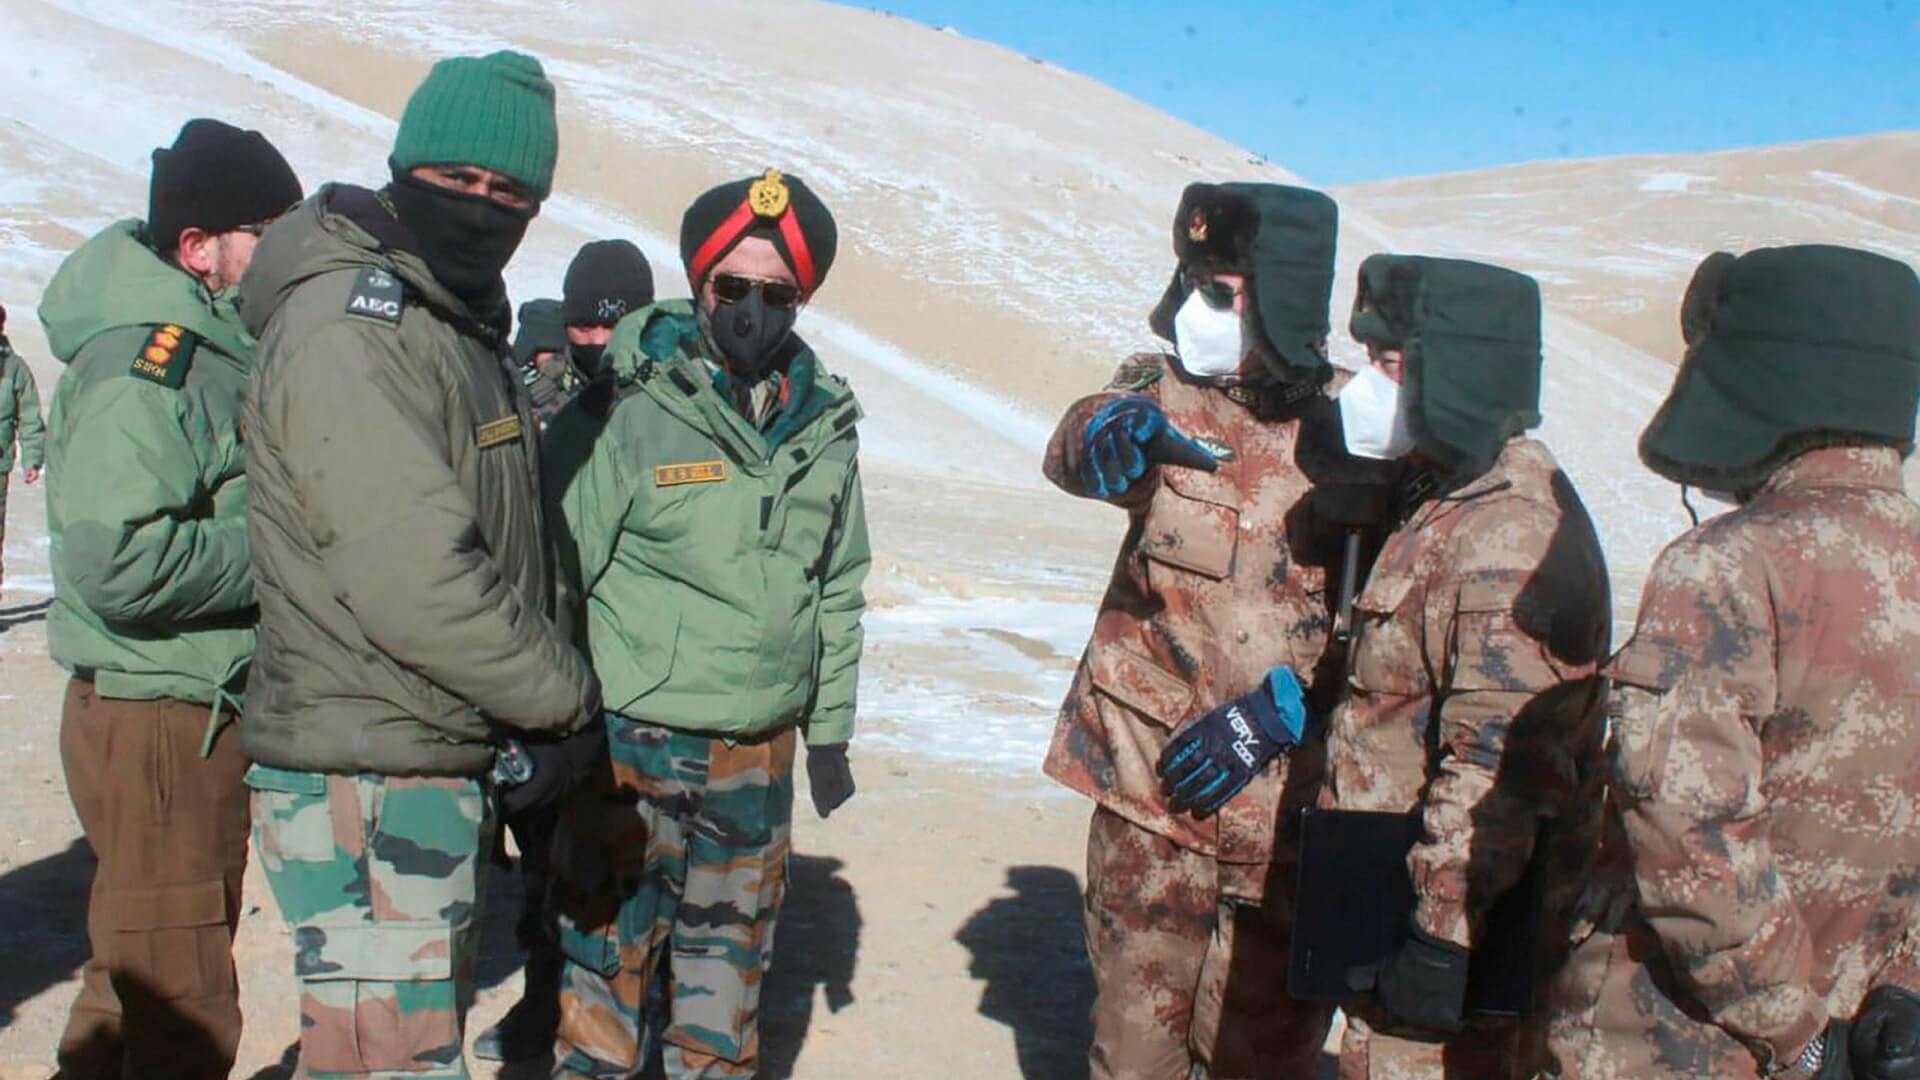 Indian, Chinese Armies in Talks After China Blocks Indian Graziers in Ladakh